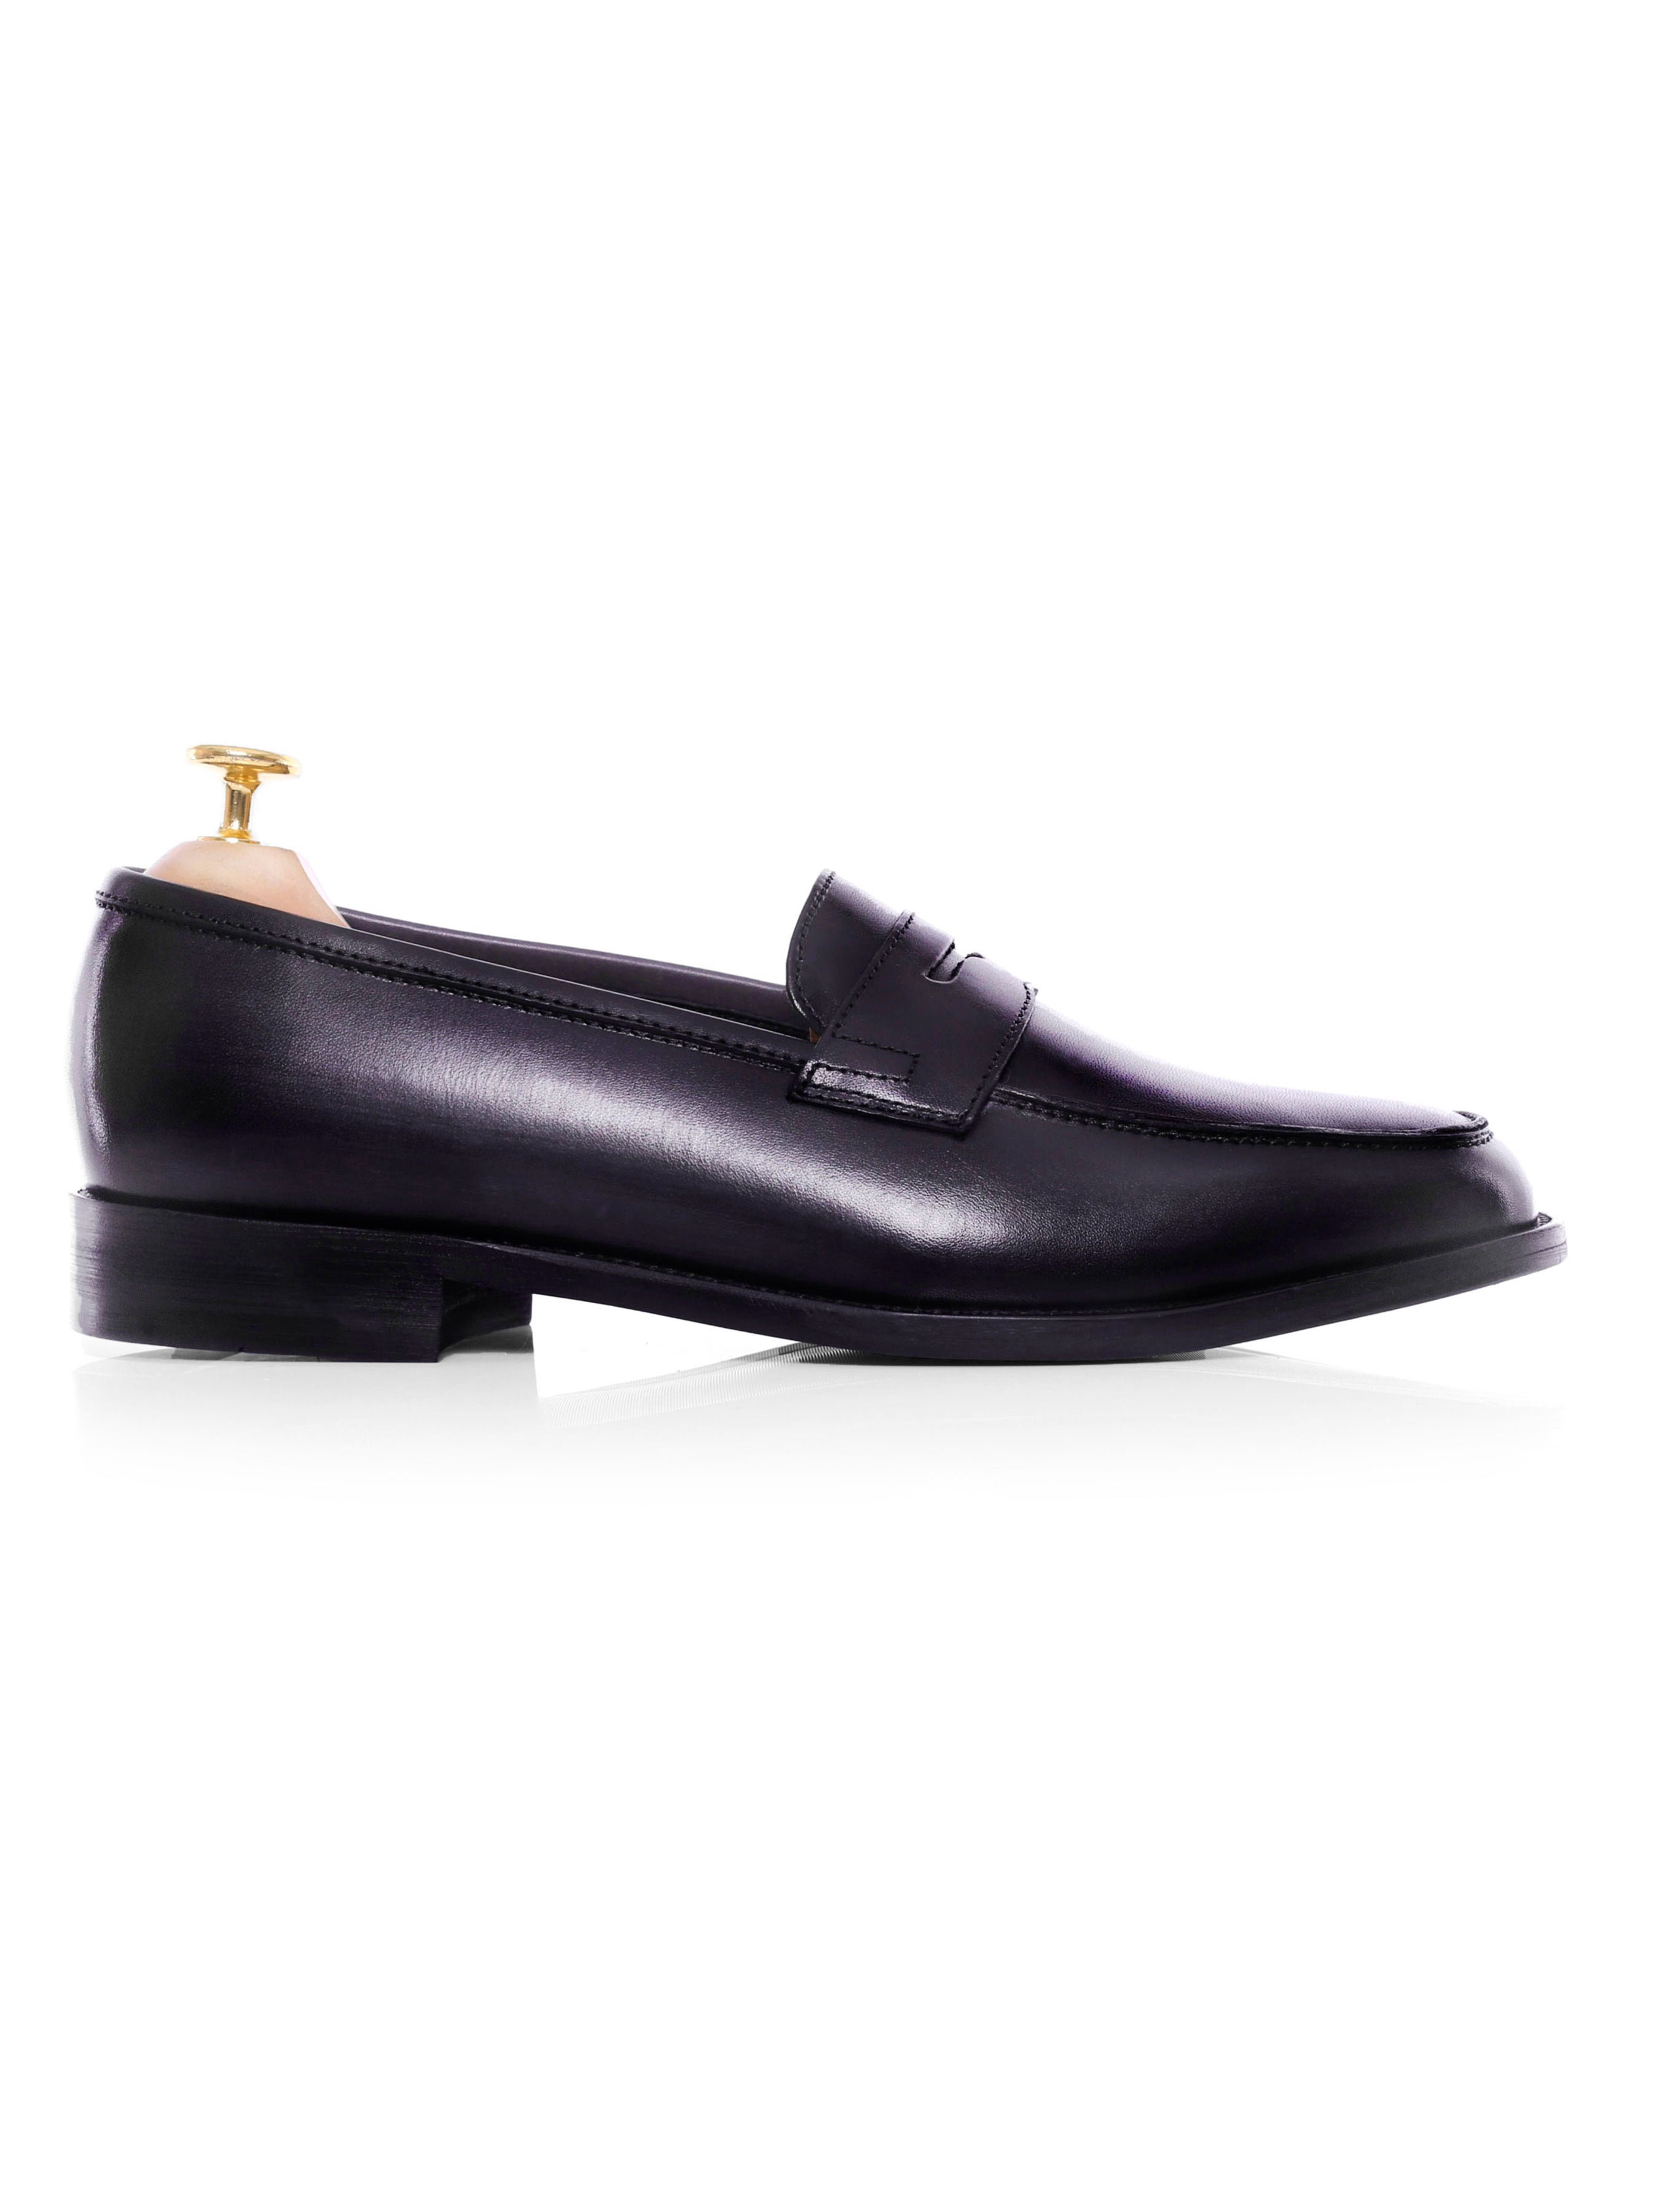 Penny Loafer - Black Grey (Hand Painted Patina)